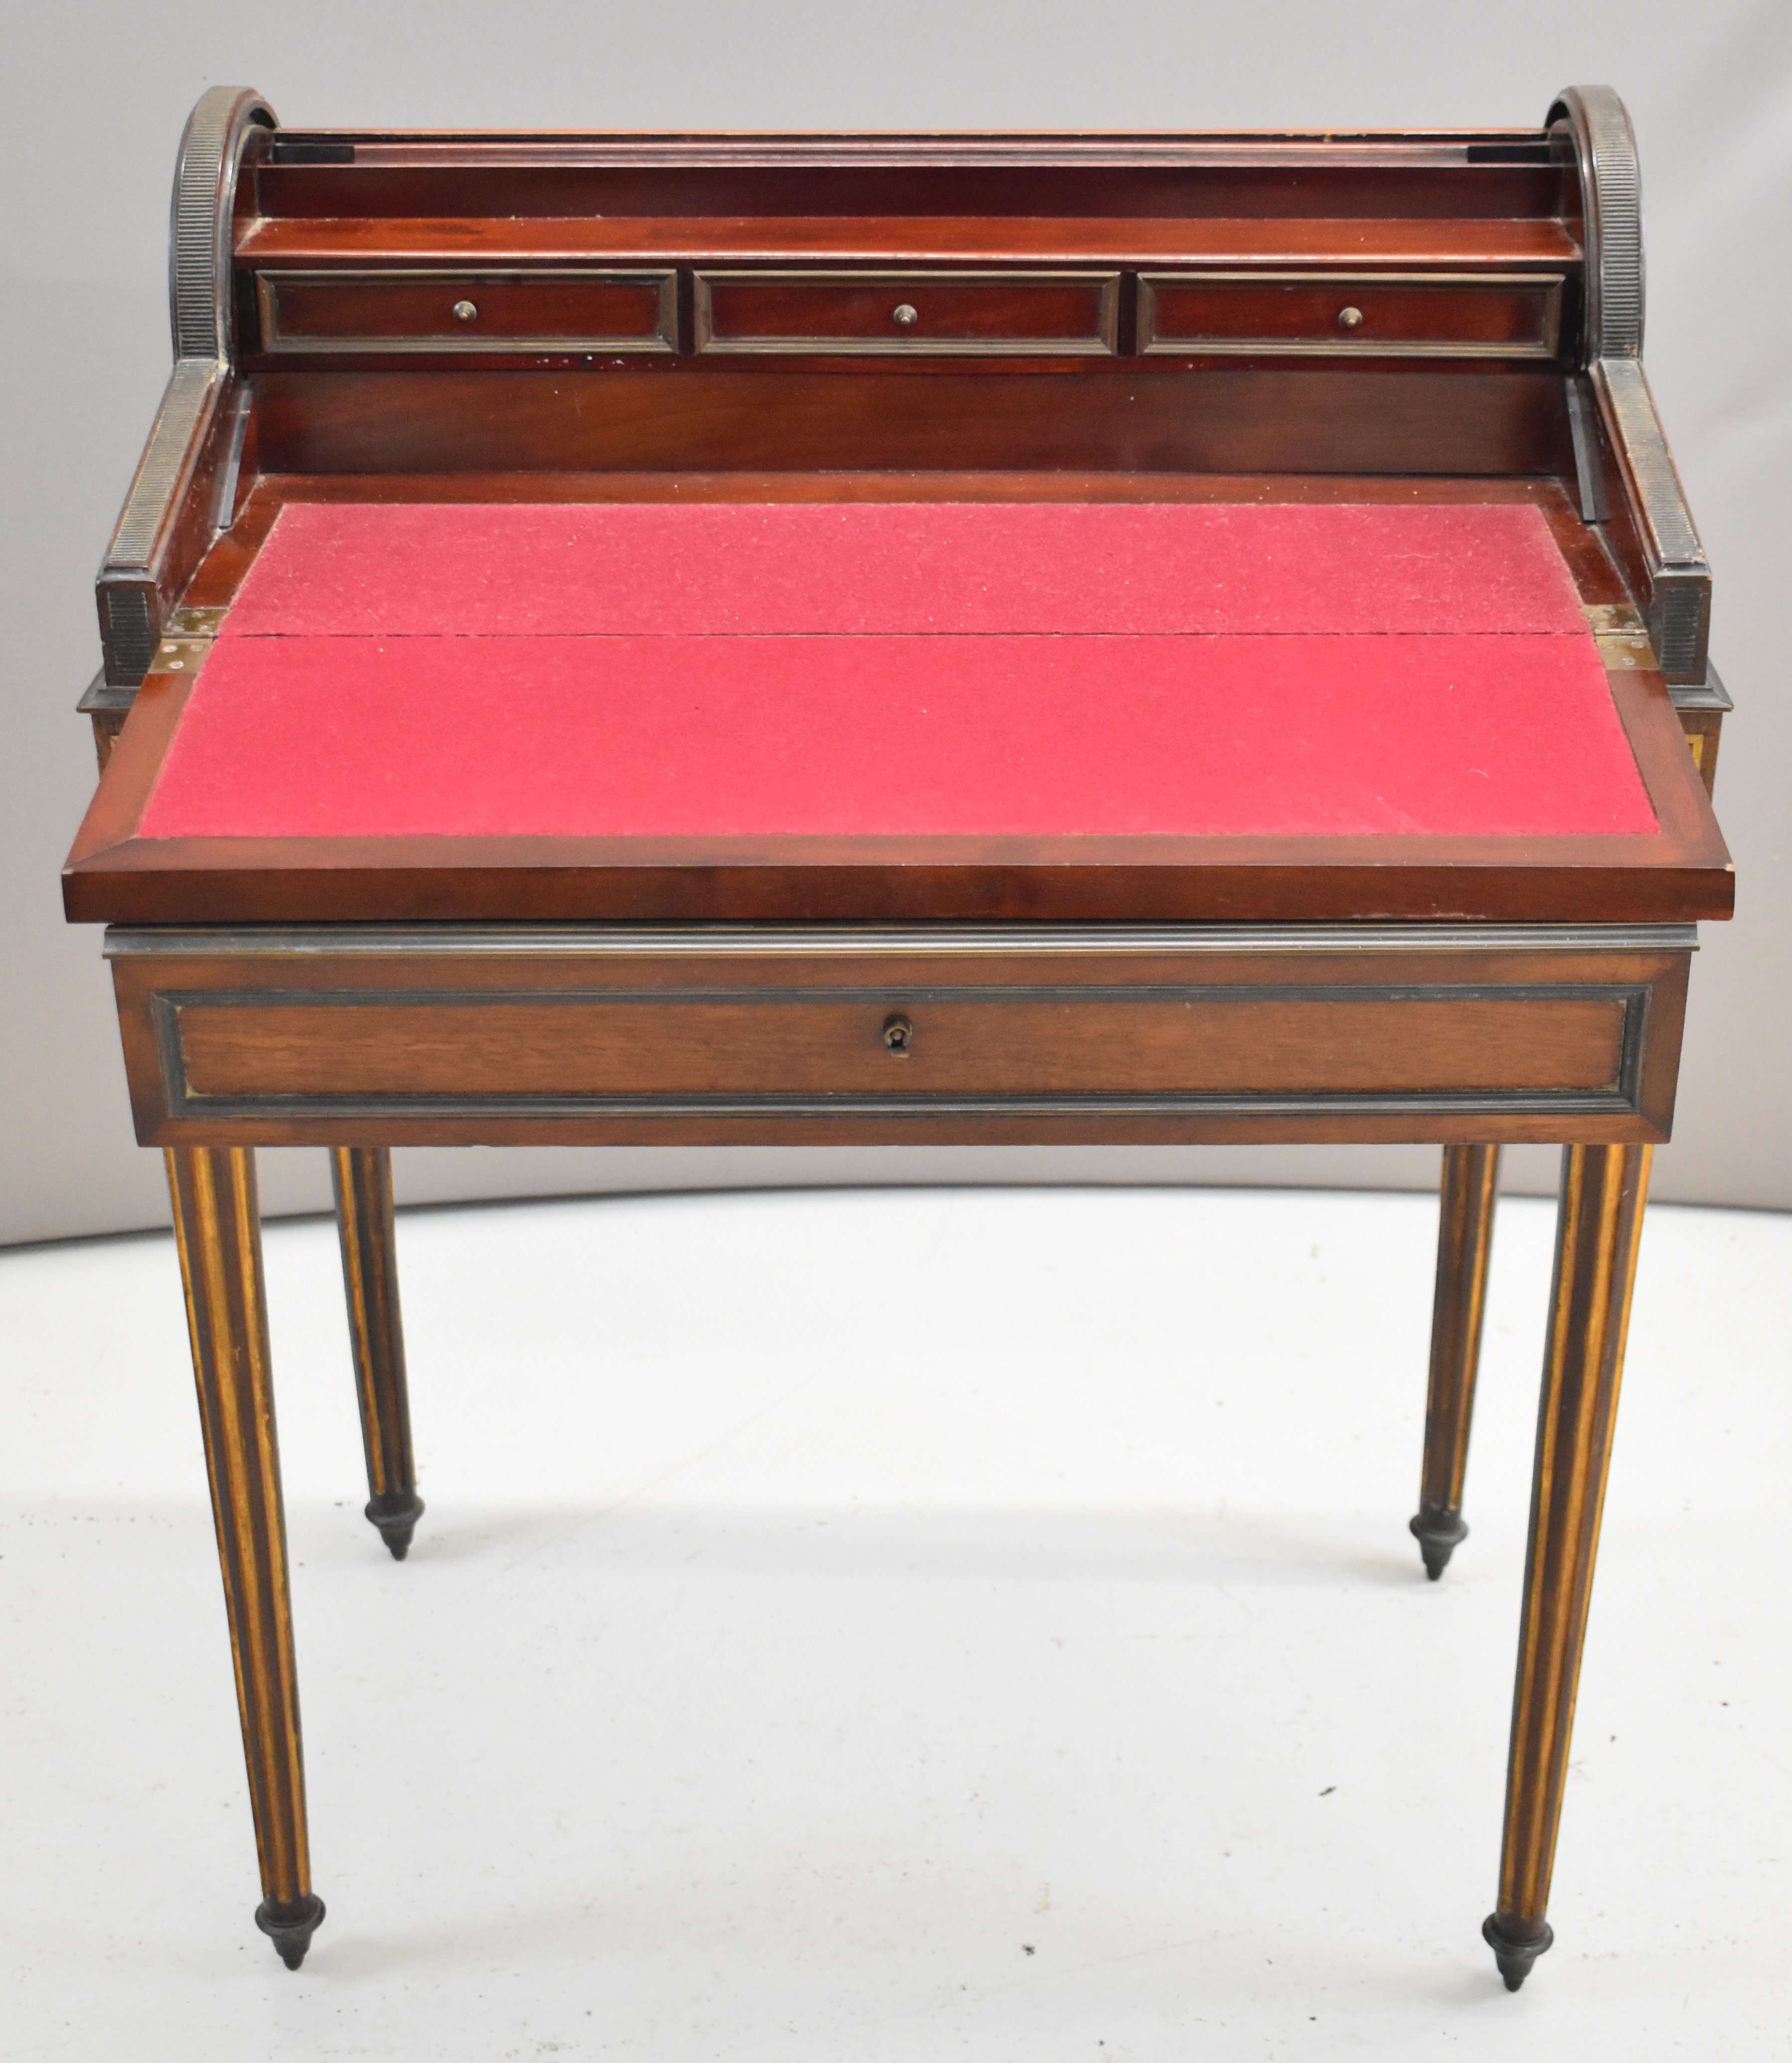 19th or early 20thC writing desk, the opening of the drawer causing the domed tambour top to - Image 4 of 4